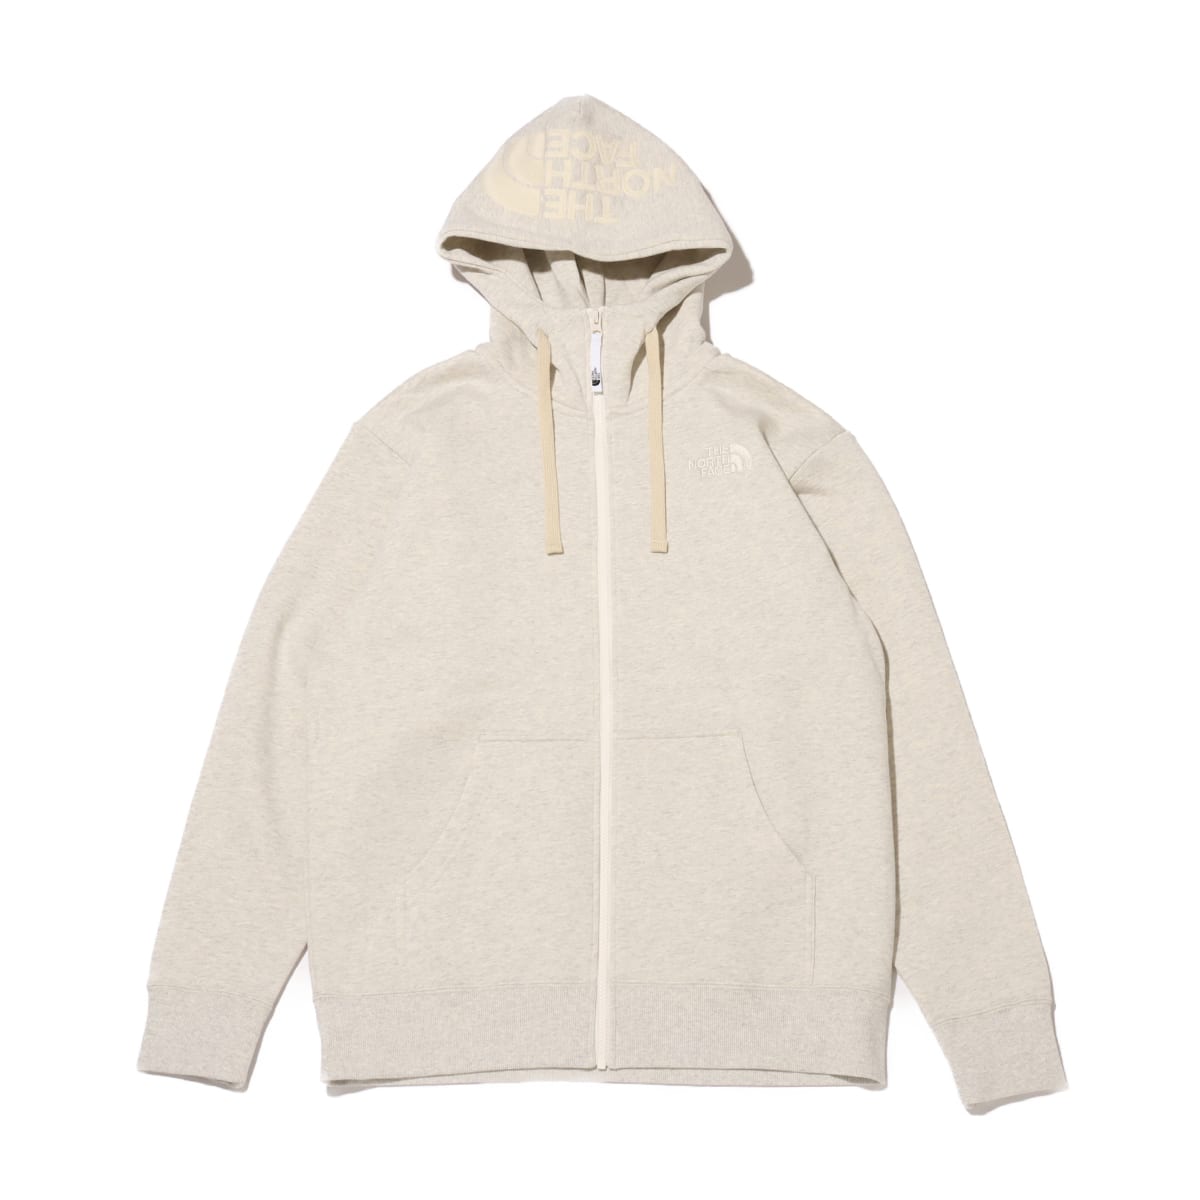 THE NORTH FACE Rearview Full Zip Hoodie オートミール